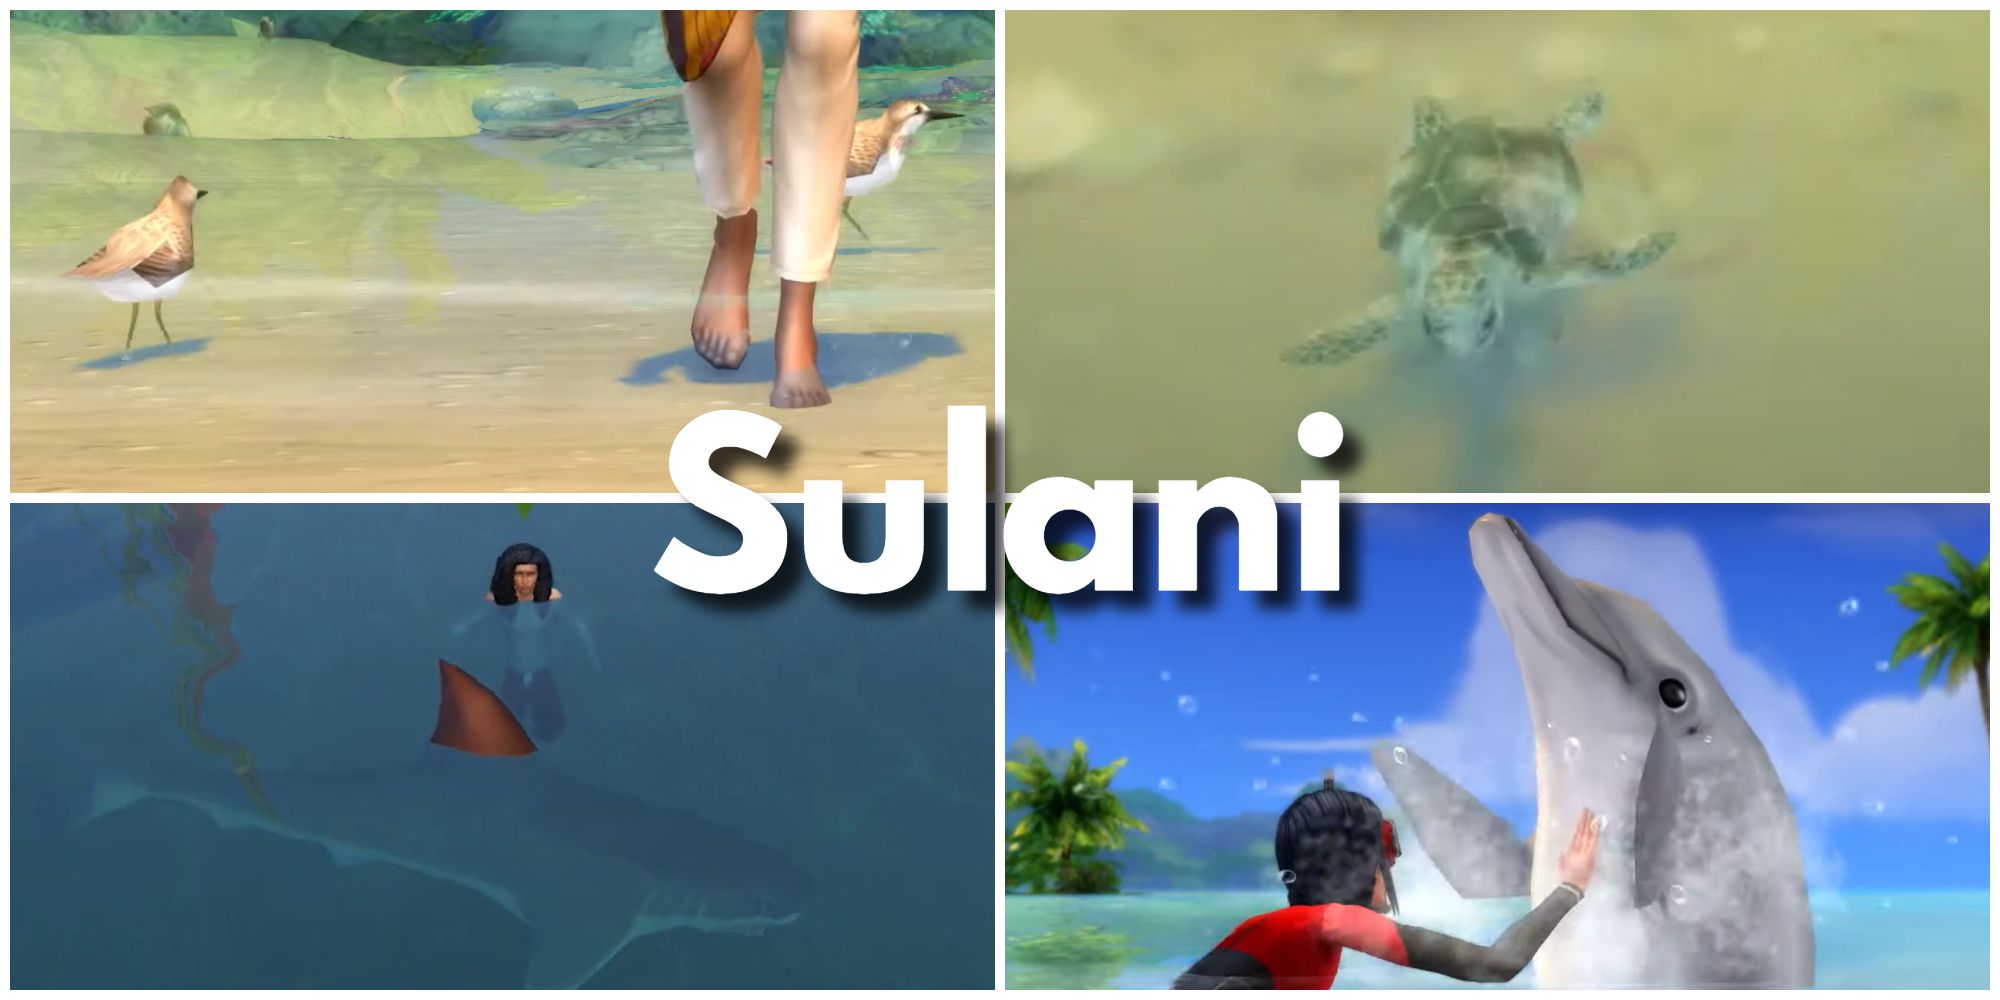 There are several species of animals for animal-lovers to enjoy in Sulani, the world from the Island Living expansion.